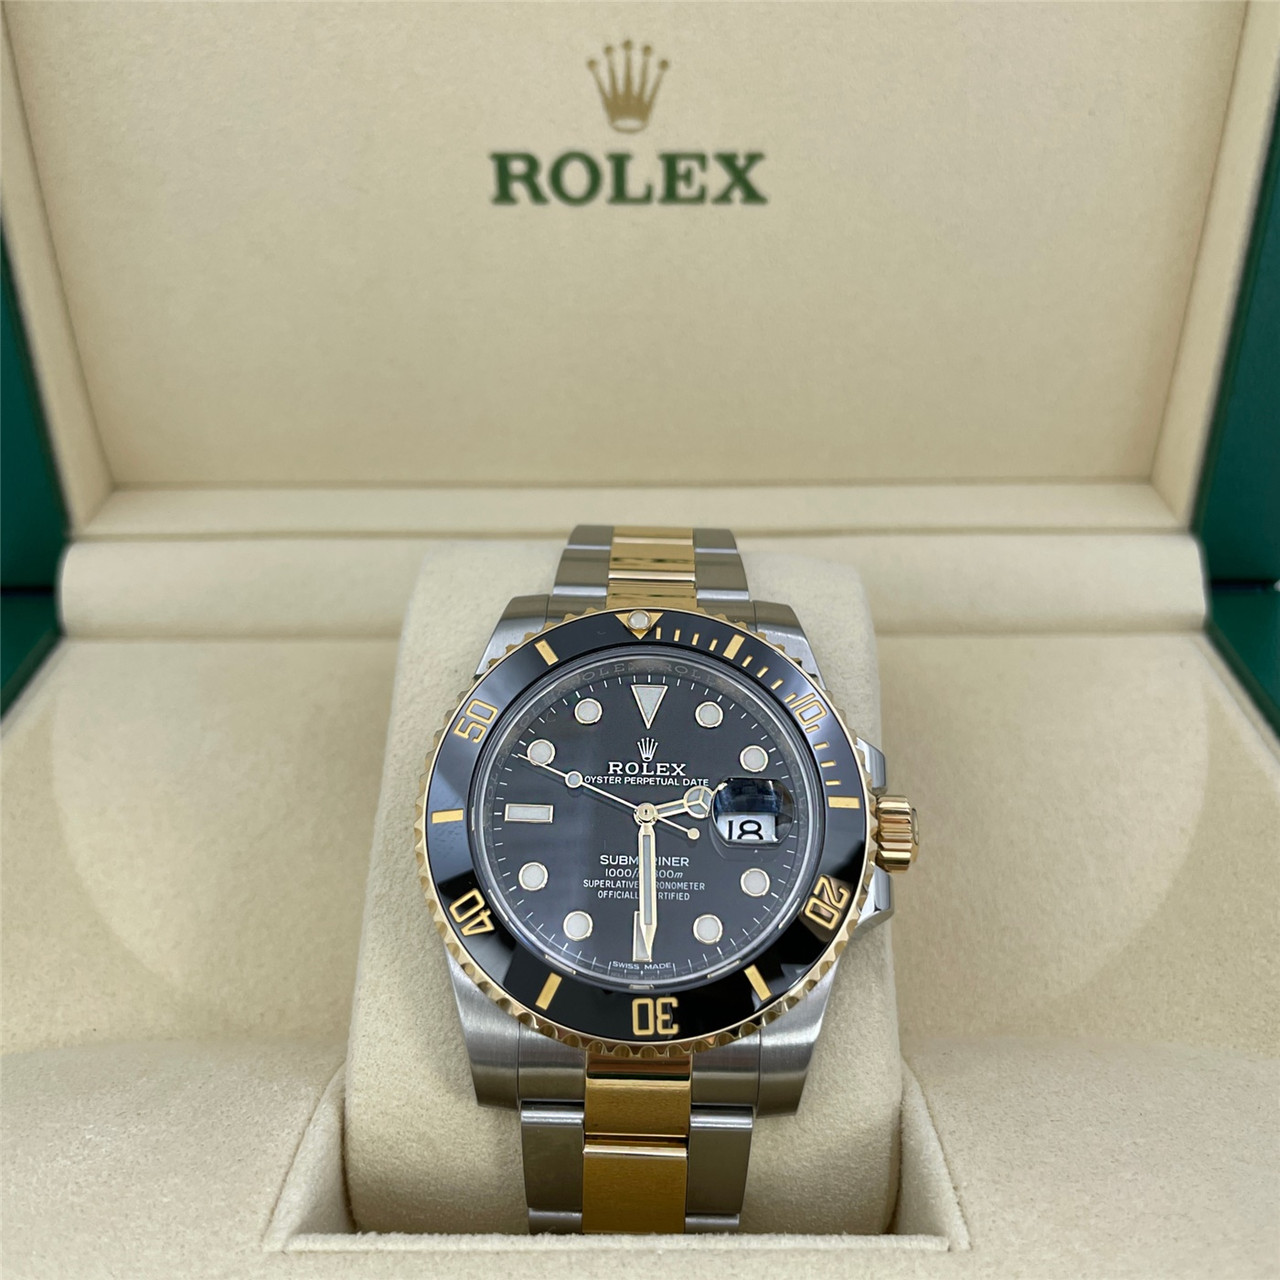 Rolex Oyster Perpetual Submariner Steel & Gold Watch 116613LN